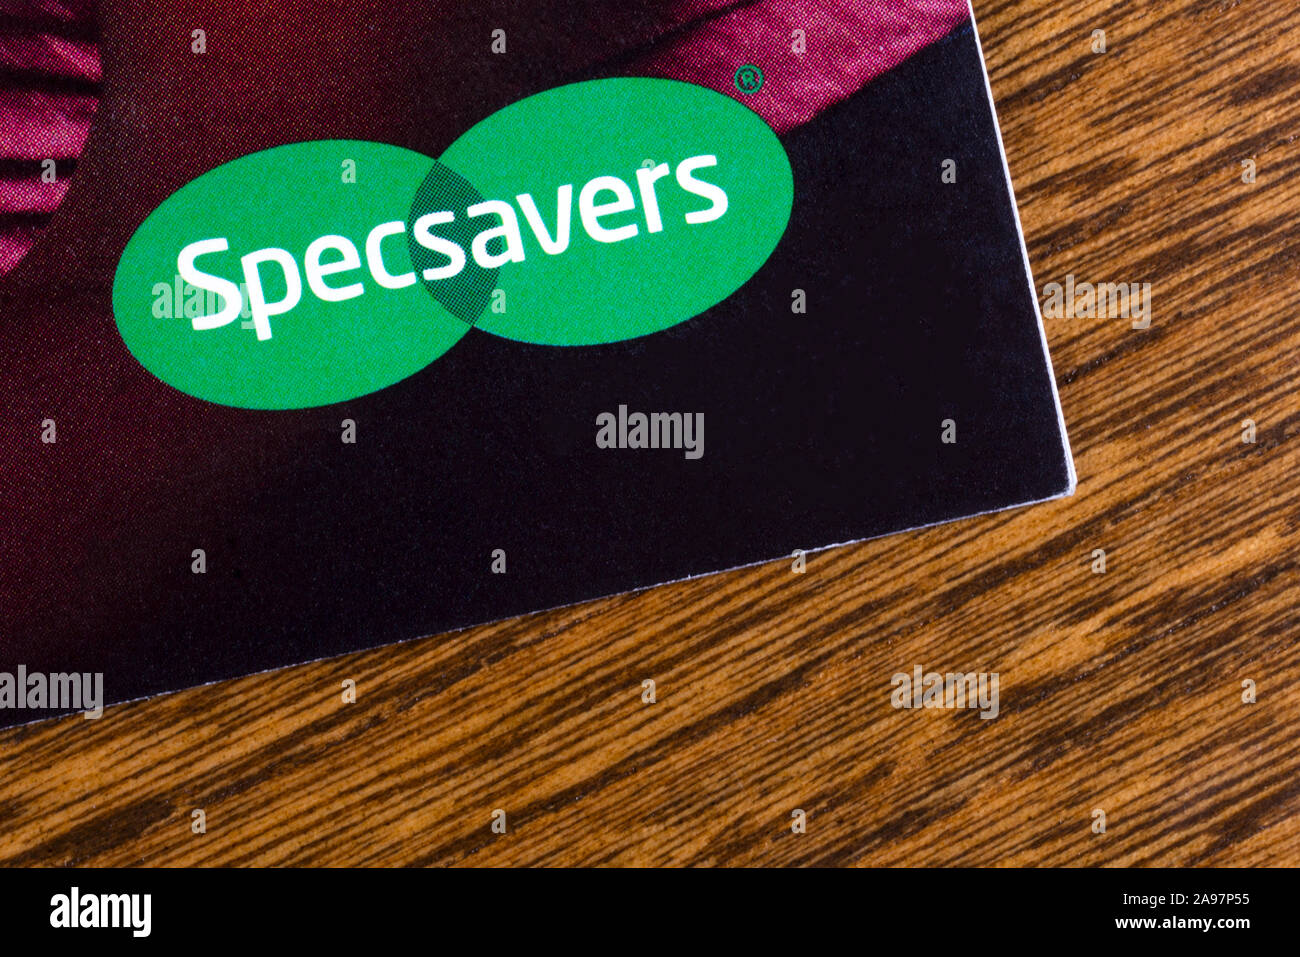 London, UK - March 7th 2019: The company logo of Specsavers, pictured on a leaflet.  Specsavers Optical Group Ltd is a British optical retail chain. Stock Photo